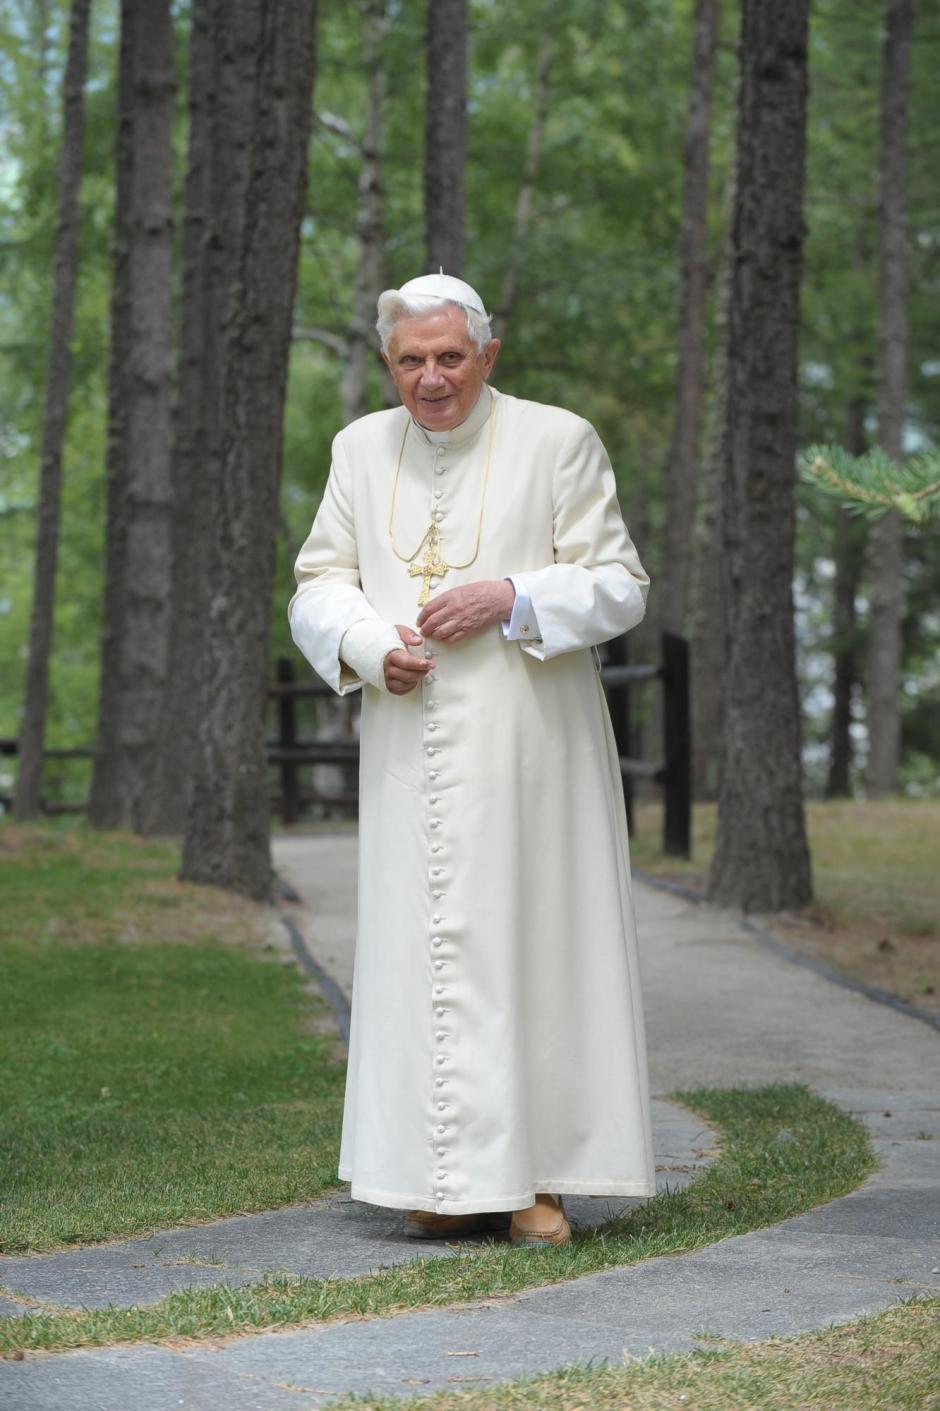 21/07/2009  Les Combes,Aosta Valley
Pope Benedict XVI during his daily summer walk
Papa Benedicto XVI